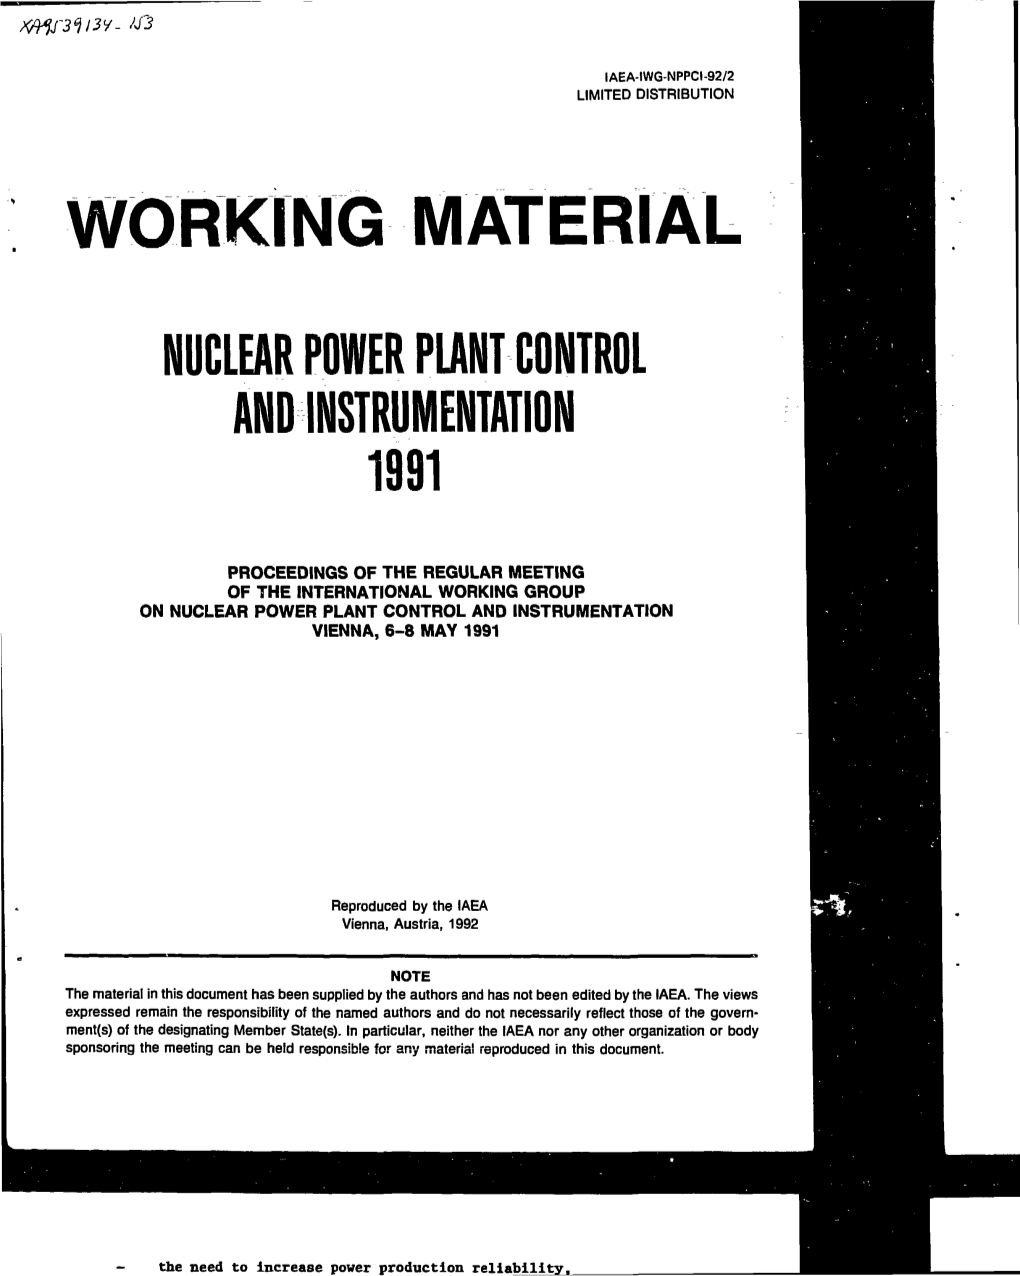 Working Material Nuclear Power Plant Control and Instrumentation 1991